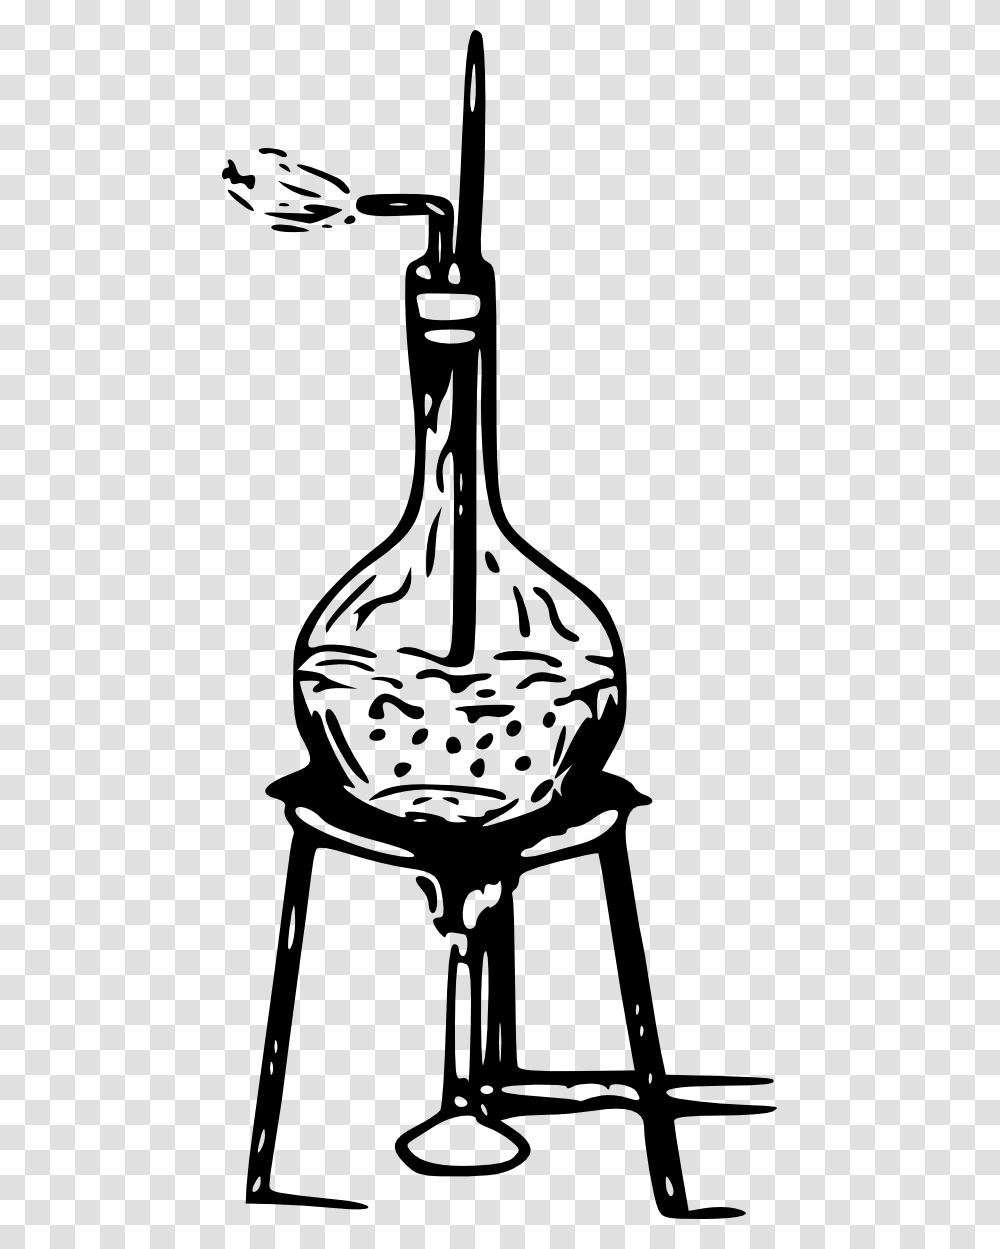 Clip Art Boiling Point Of Water Black White, Vase, Jar, Pottery, Stencil Transparent Png